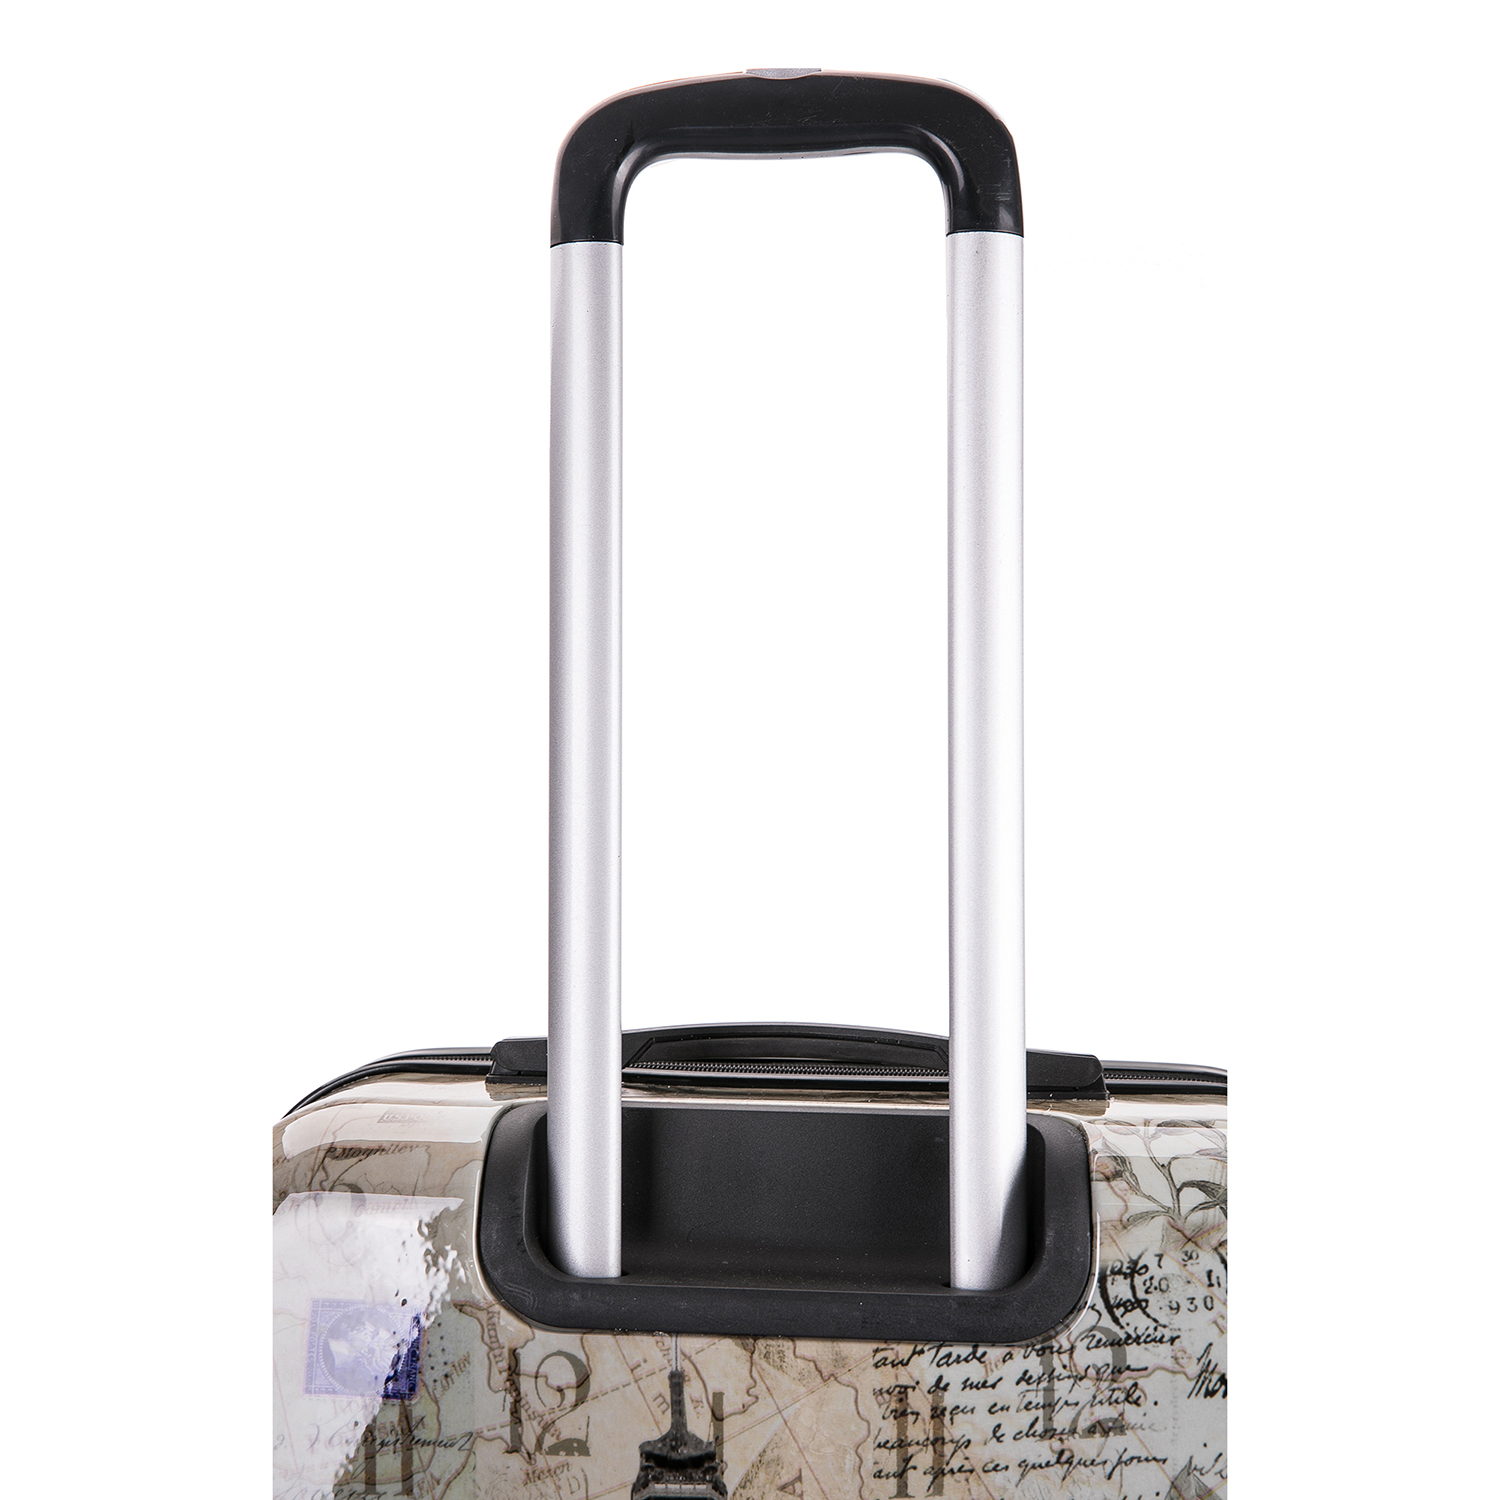 InUSA Print 24" Hardside Checked Luggage with Spinner Wheels, Handle and Trolley, Paris - image 14 of 15